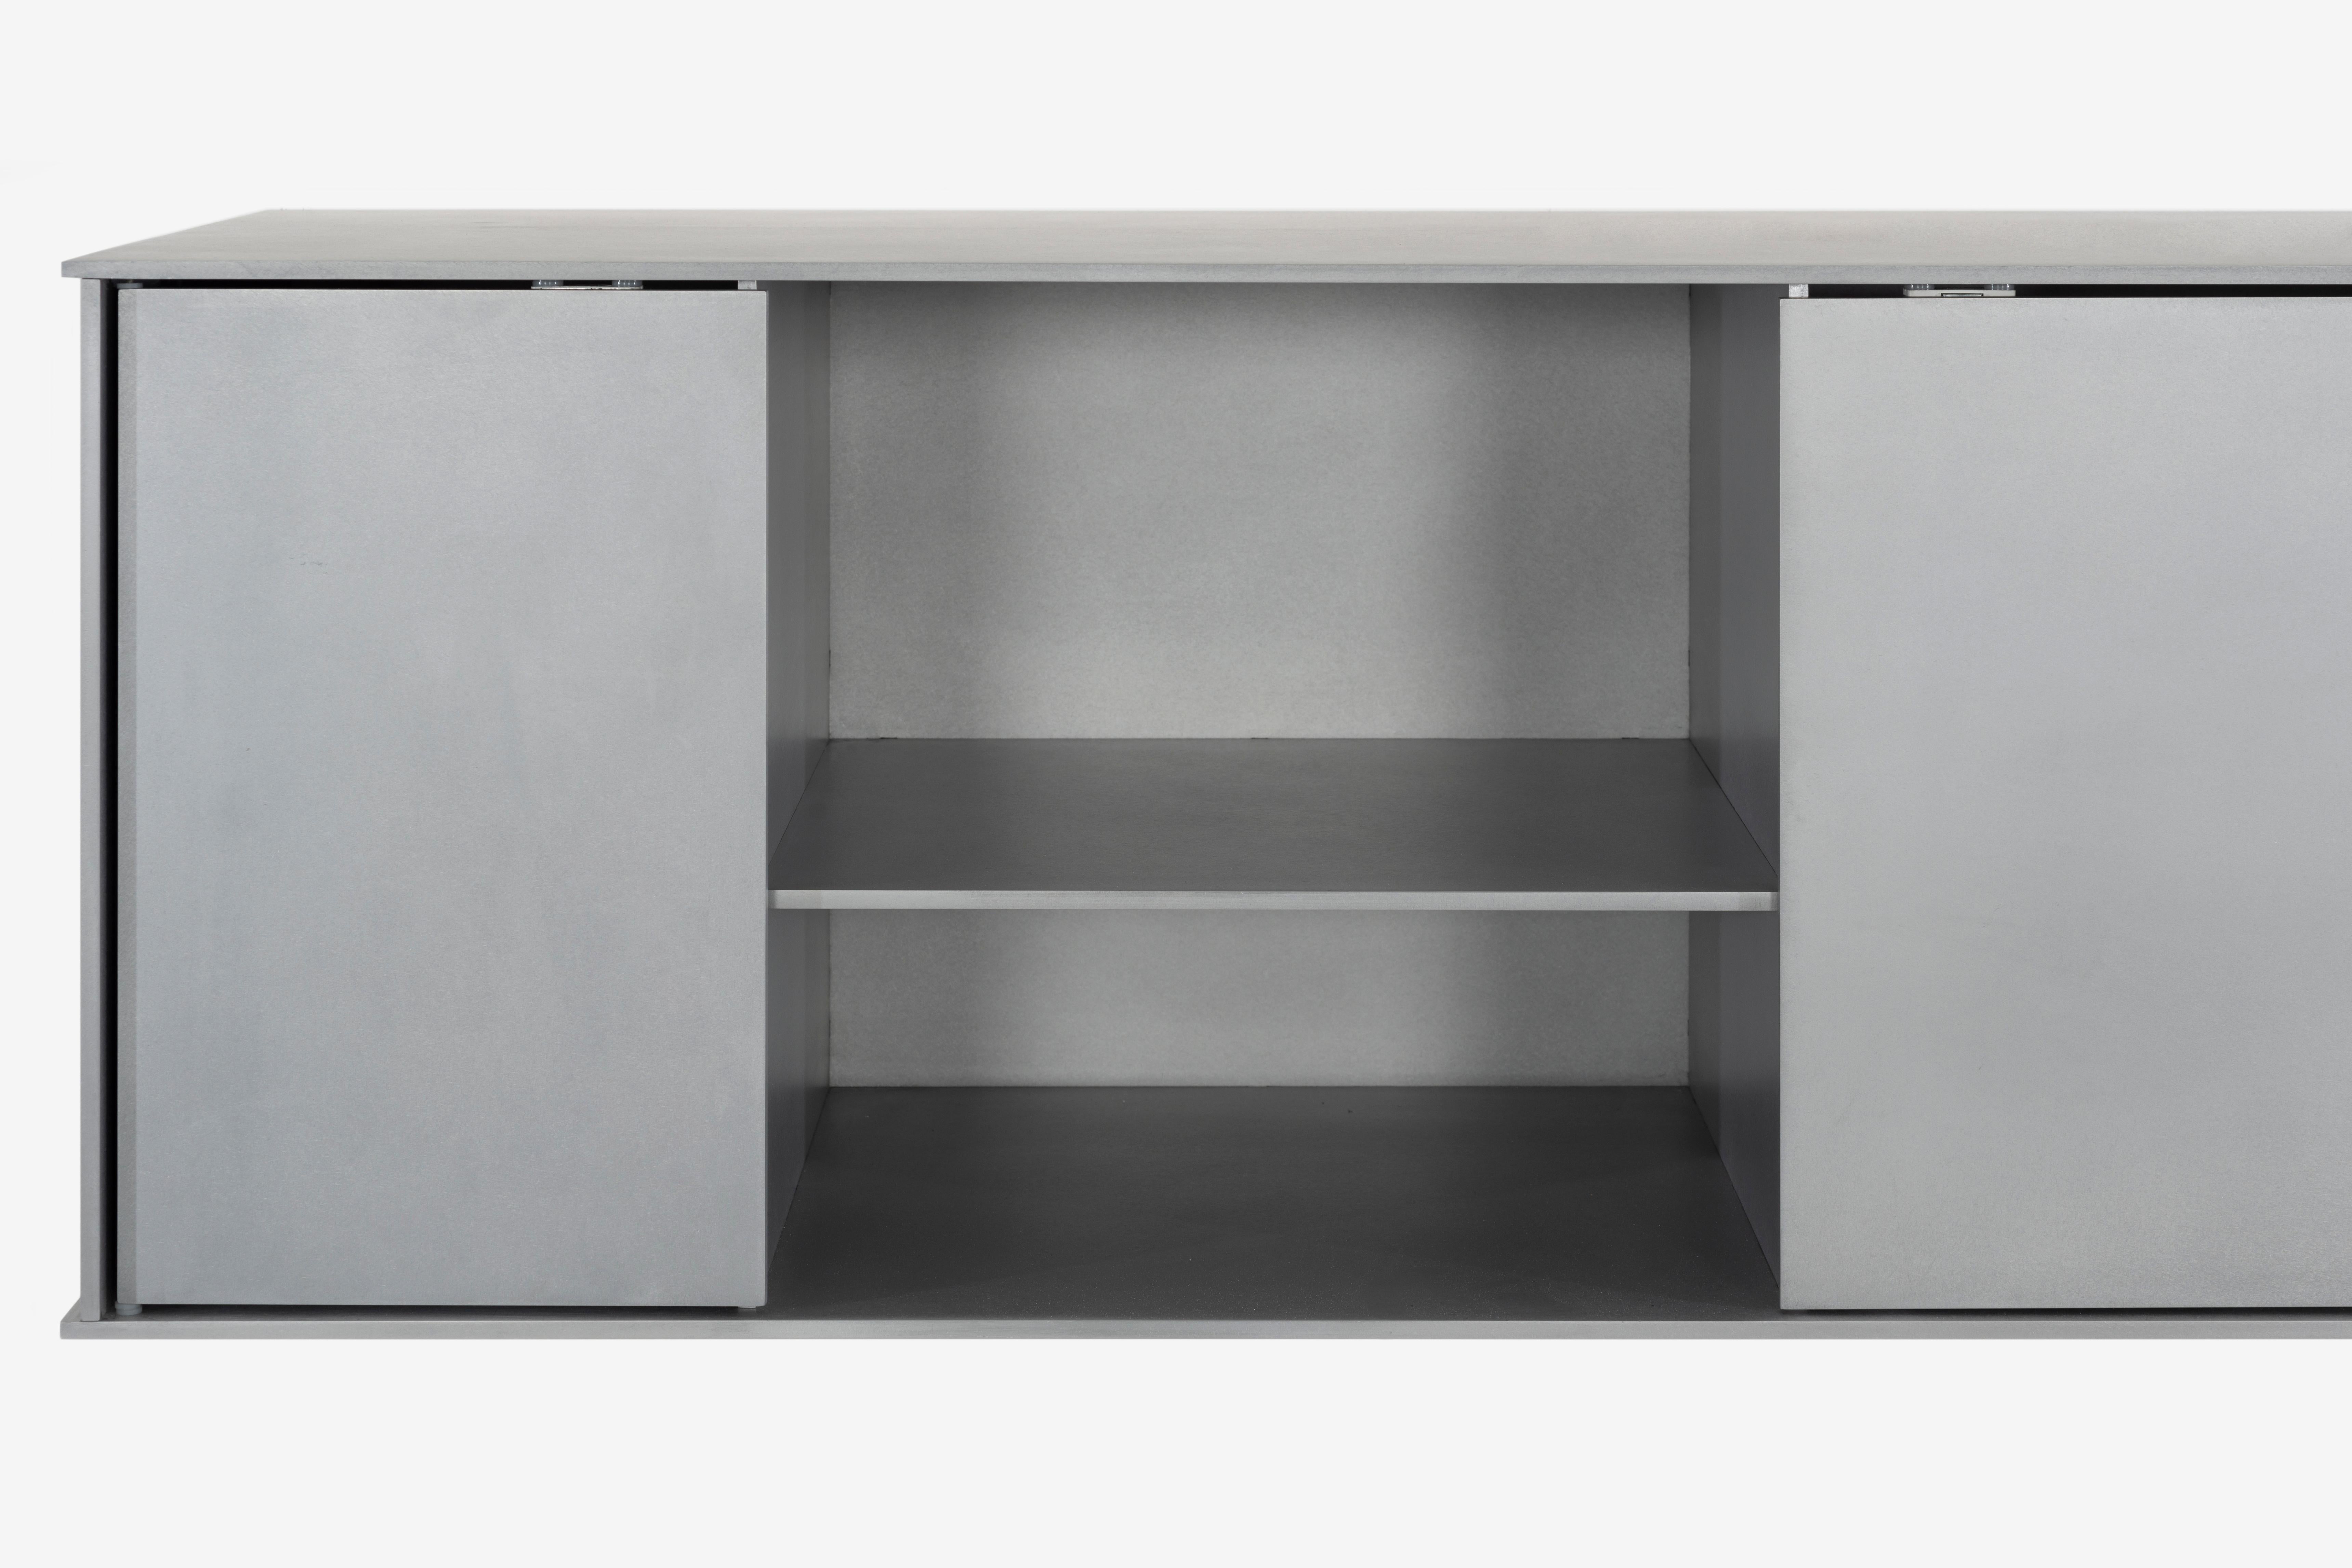 The Minimalist wall-mounted G shelf is sculpted out of 1/4 inch thick, wax-polished aluminum with two Minimalist pin-hinged doors. Each shelf has an inset welded U-channel that spans the length of the shelf and easily mounts on included custom-bent